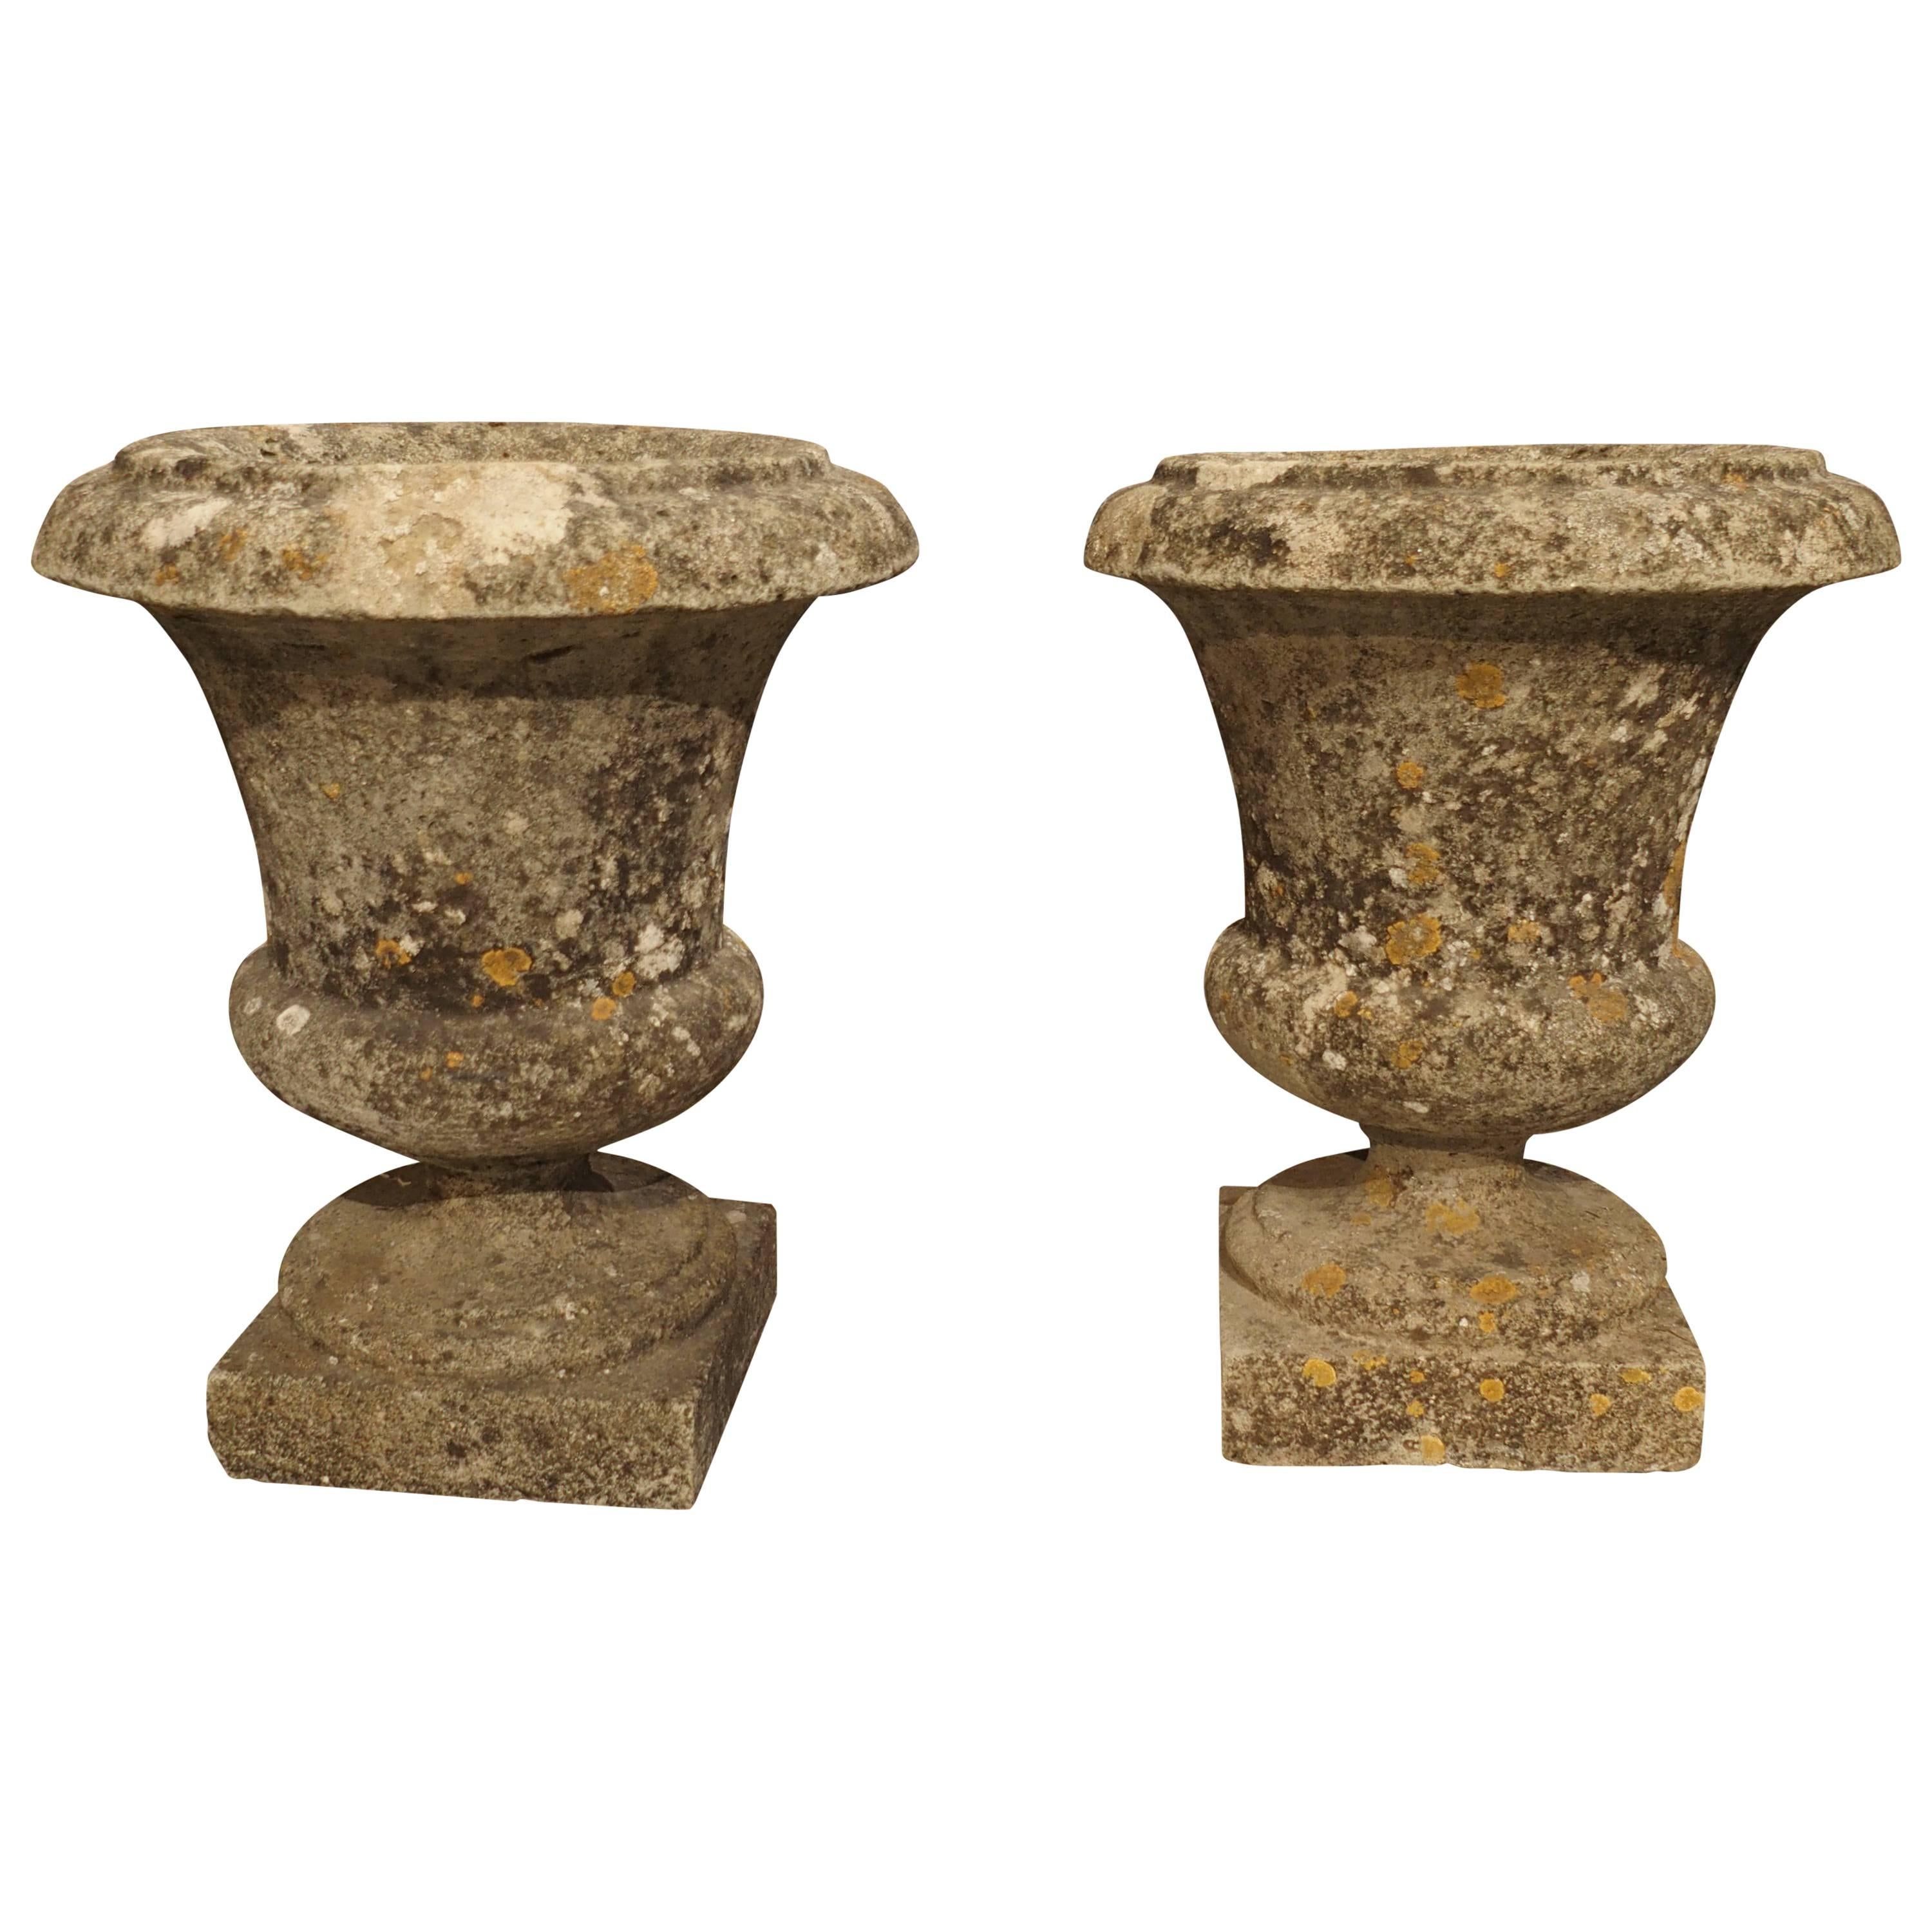 Pair of Small Reconstituted Stone Urns from France